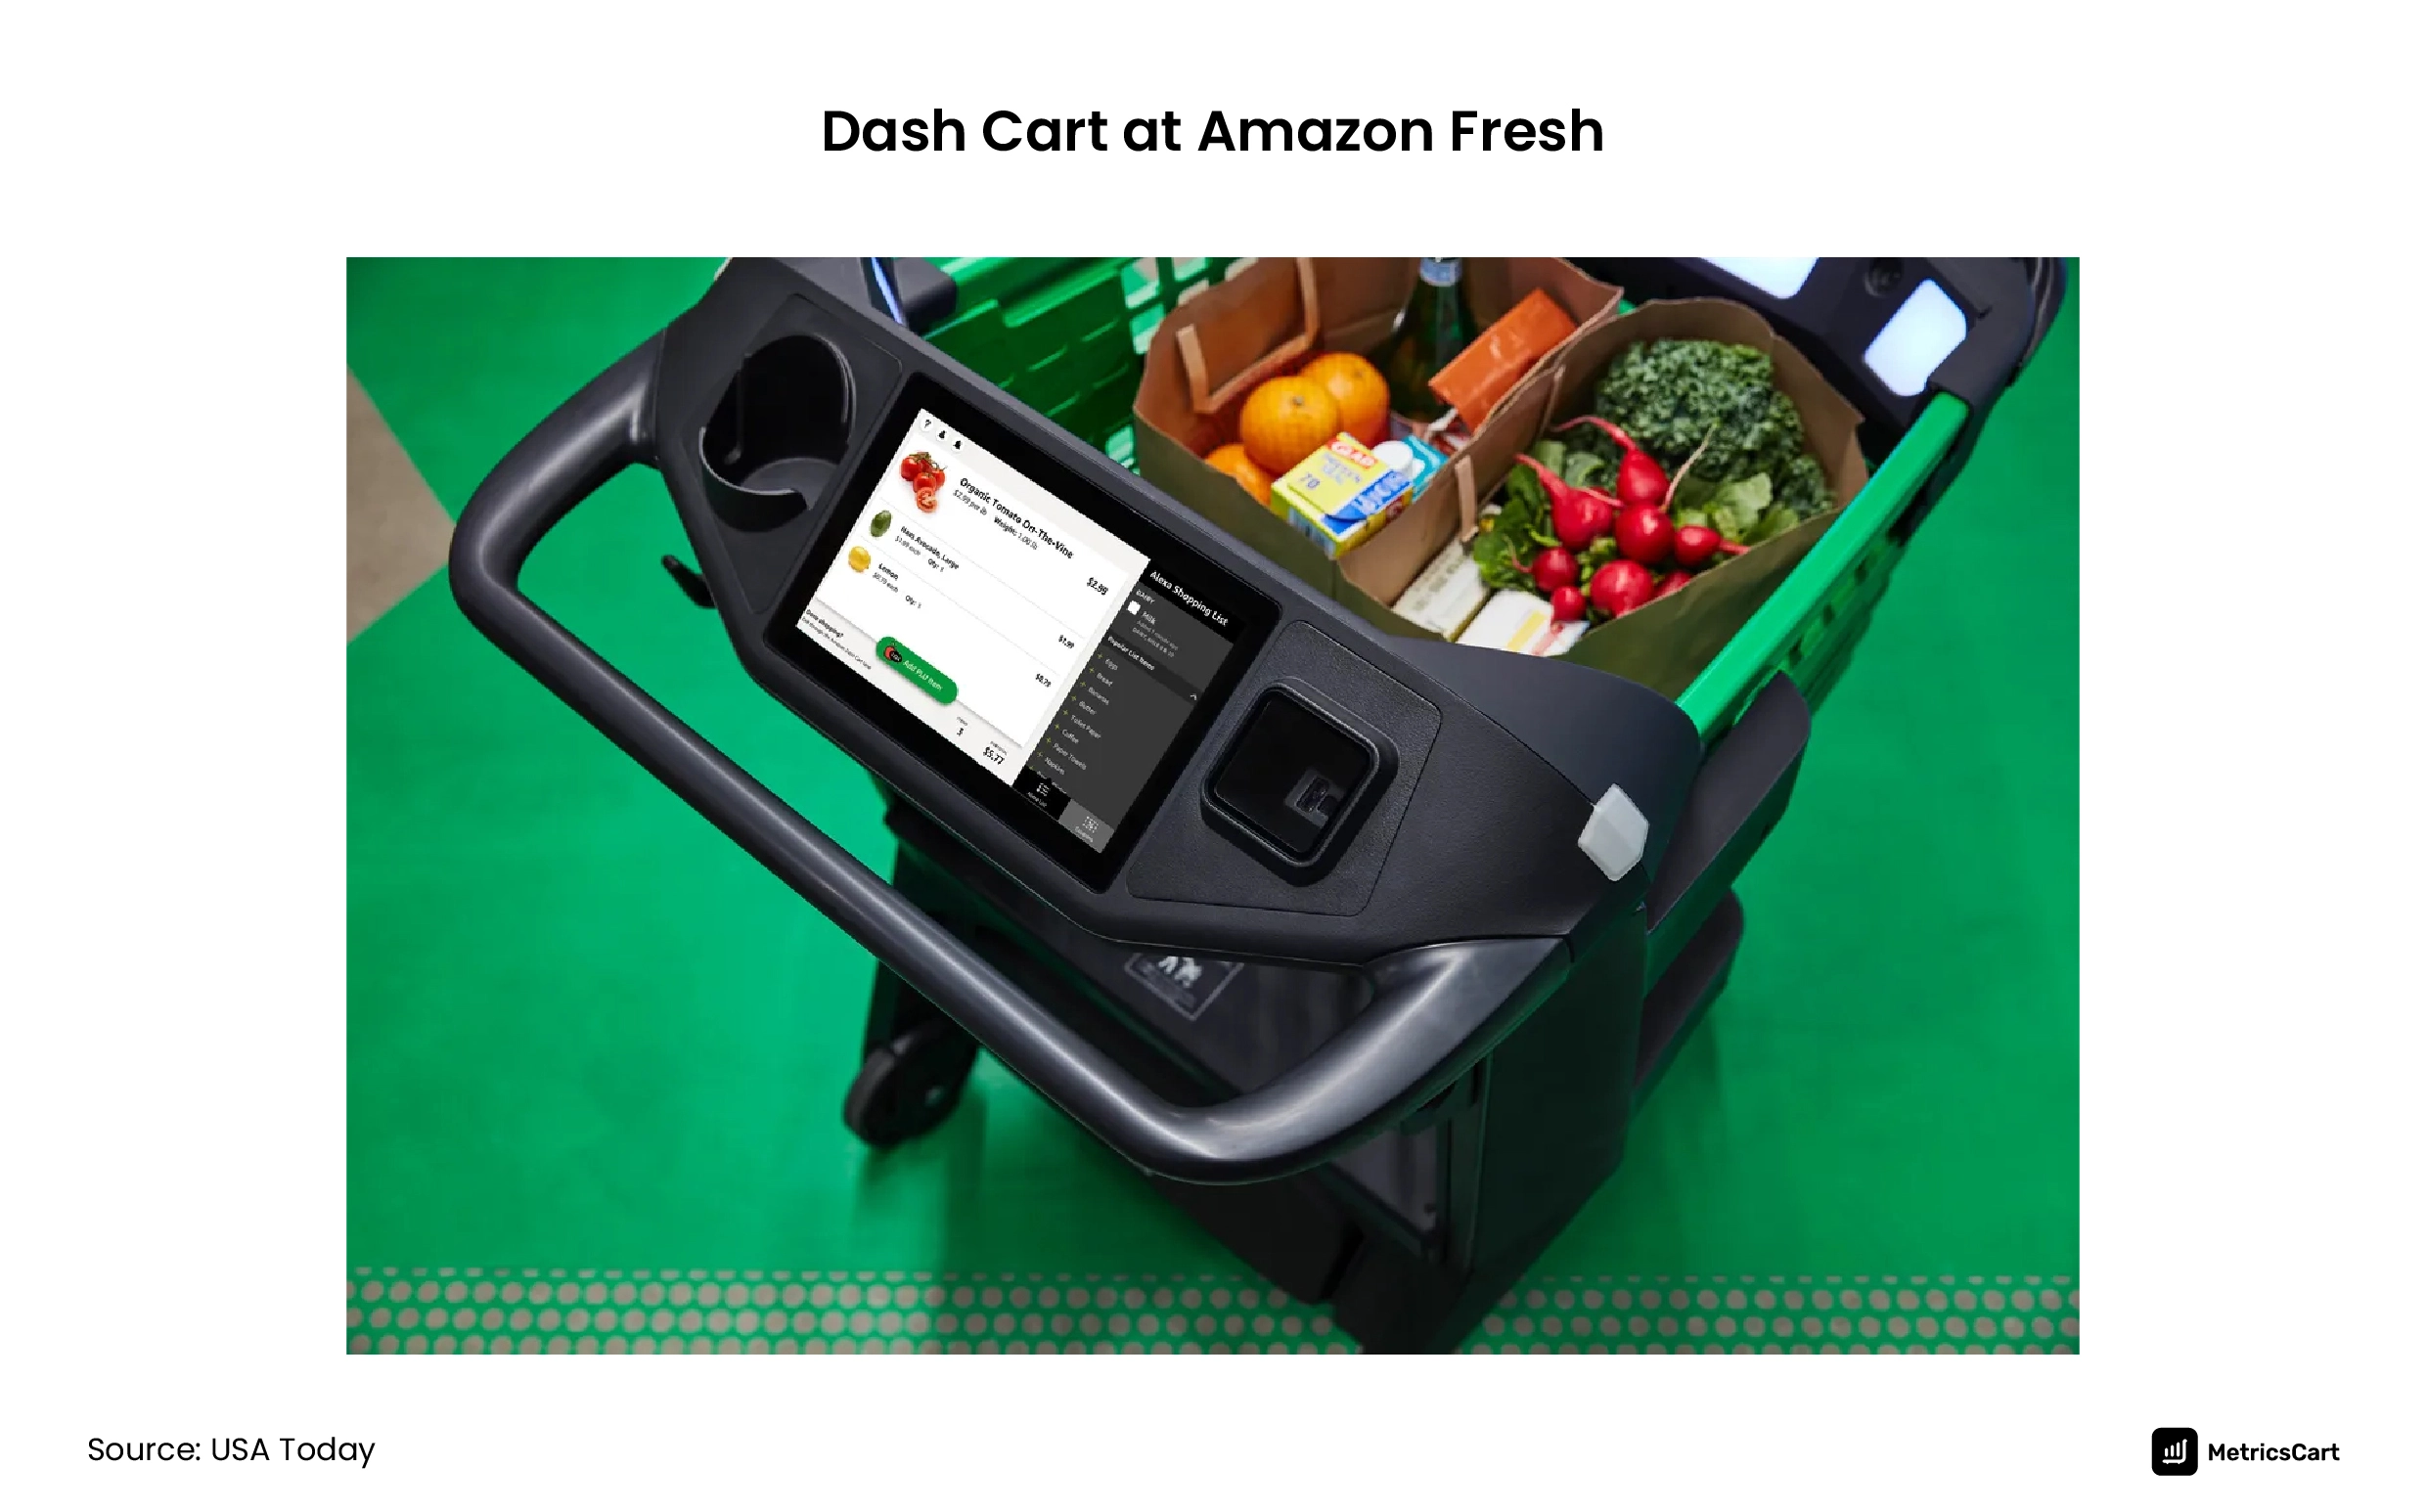 Dash Cart at Amazon stores calculates the Price of the items in the cart